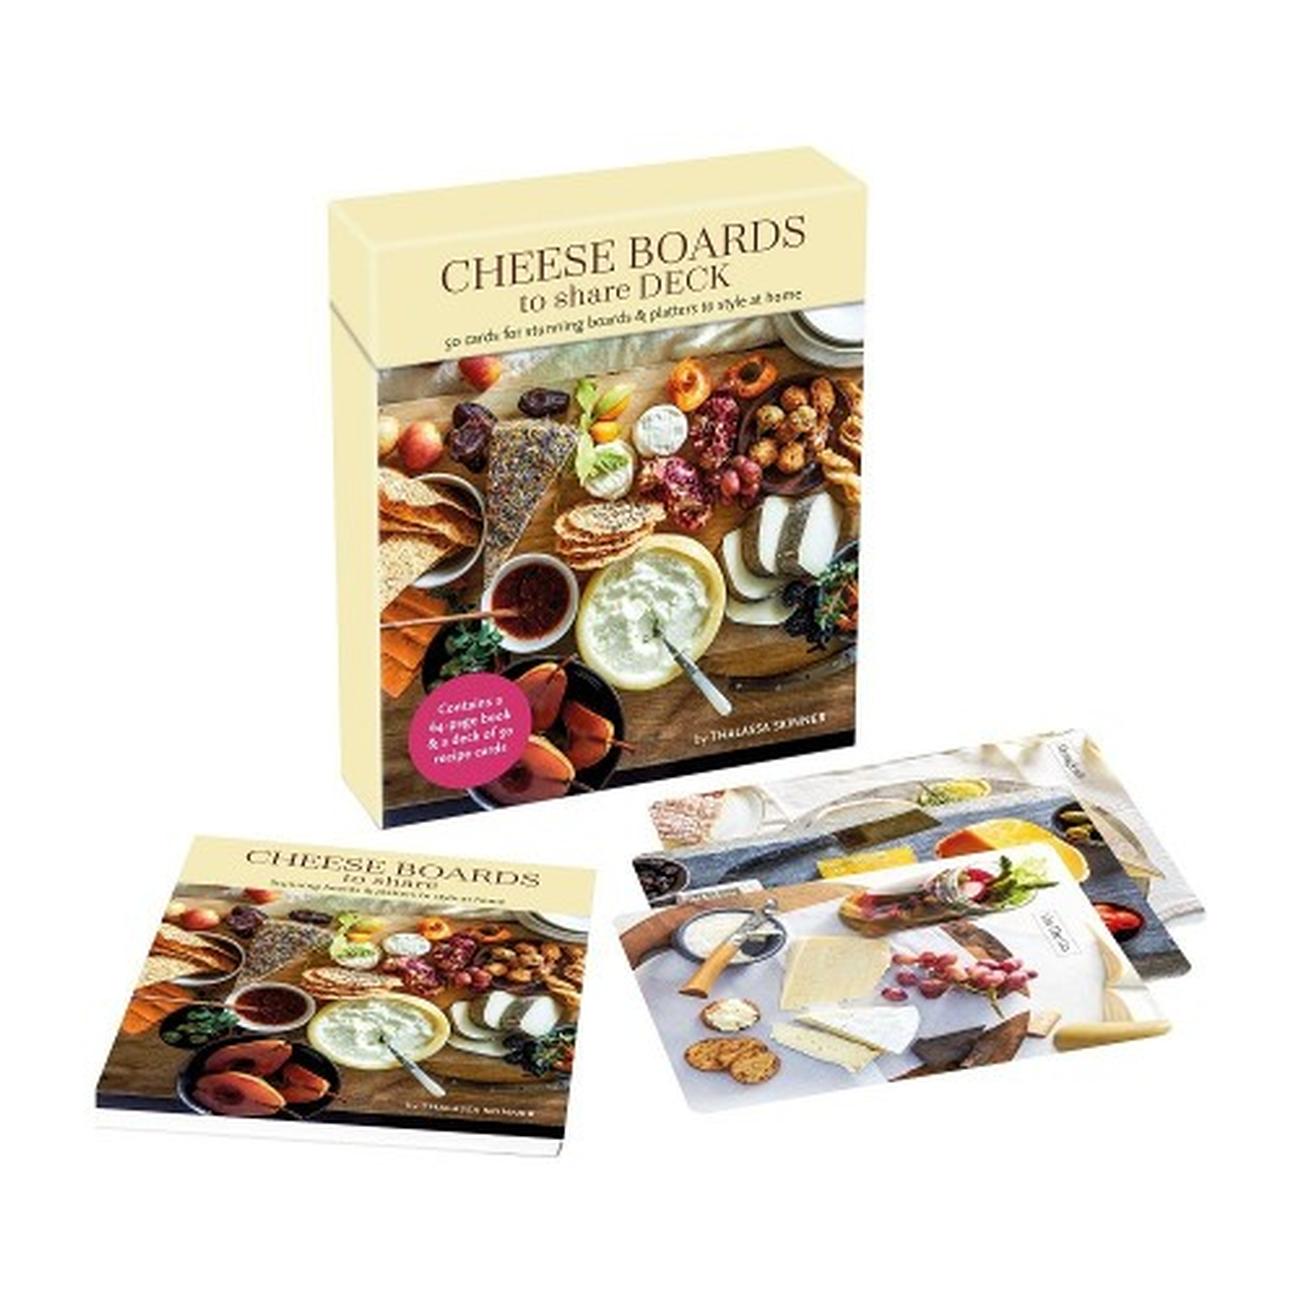 cheese-boards-to-share-deck - Cheese Boards To Share Deck 